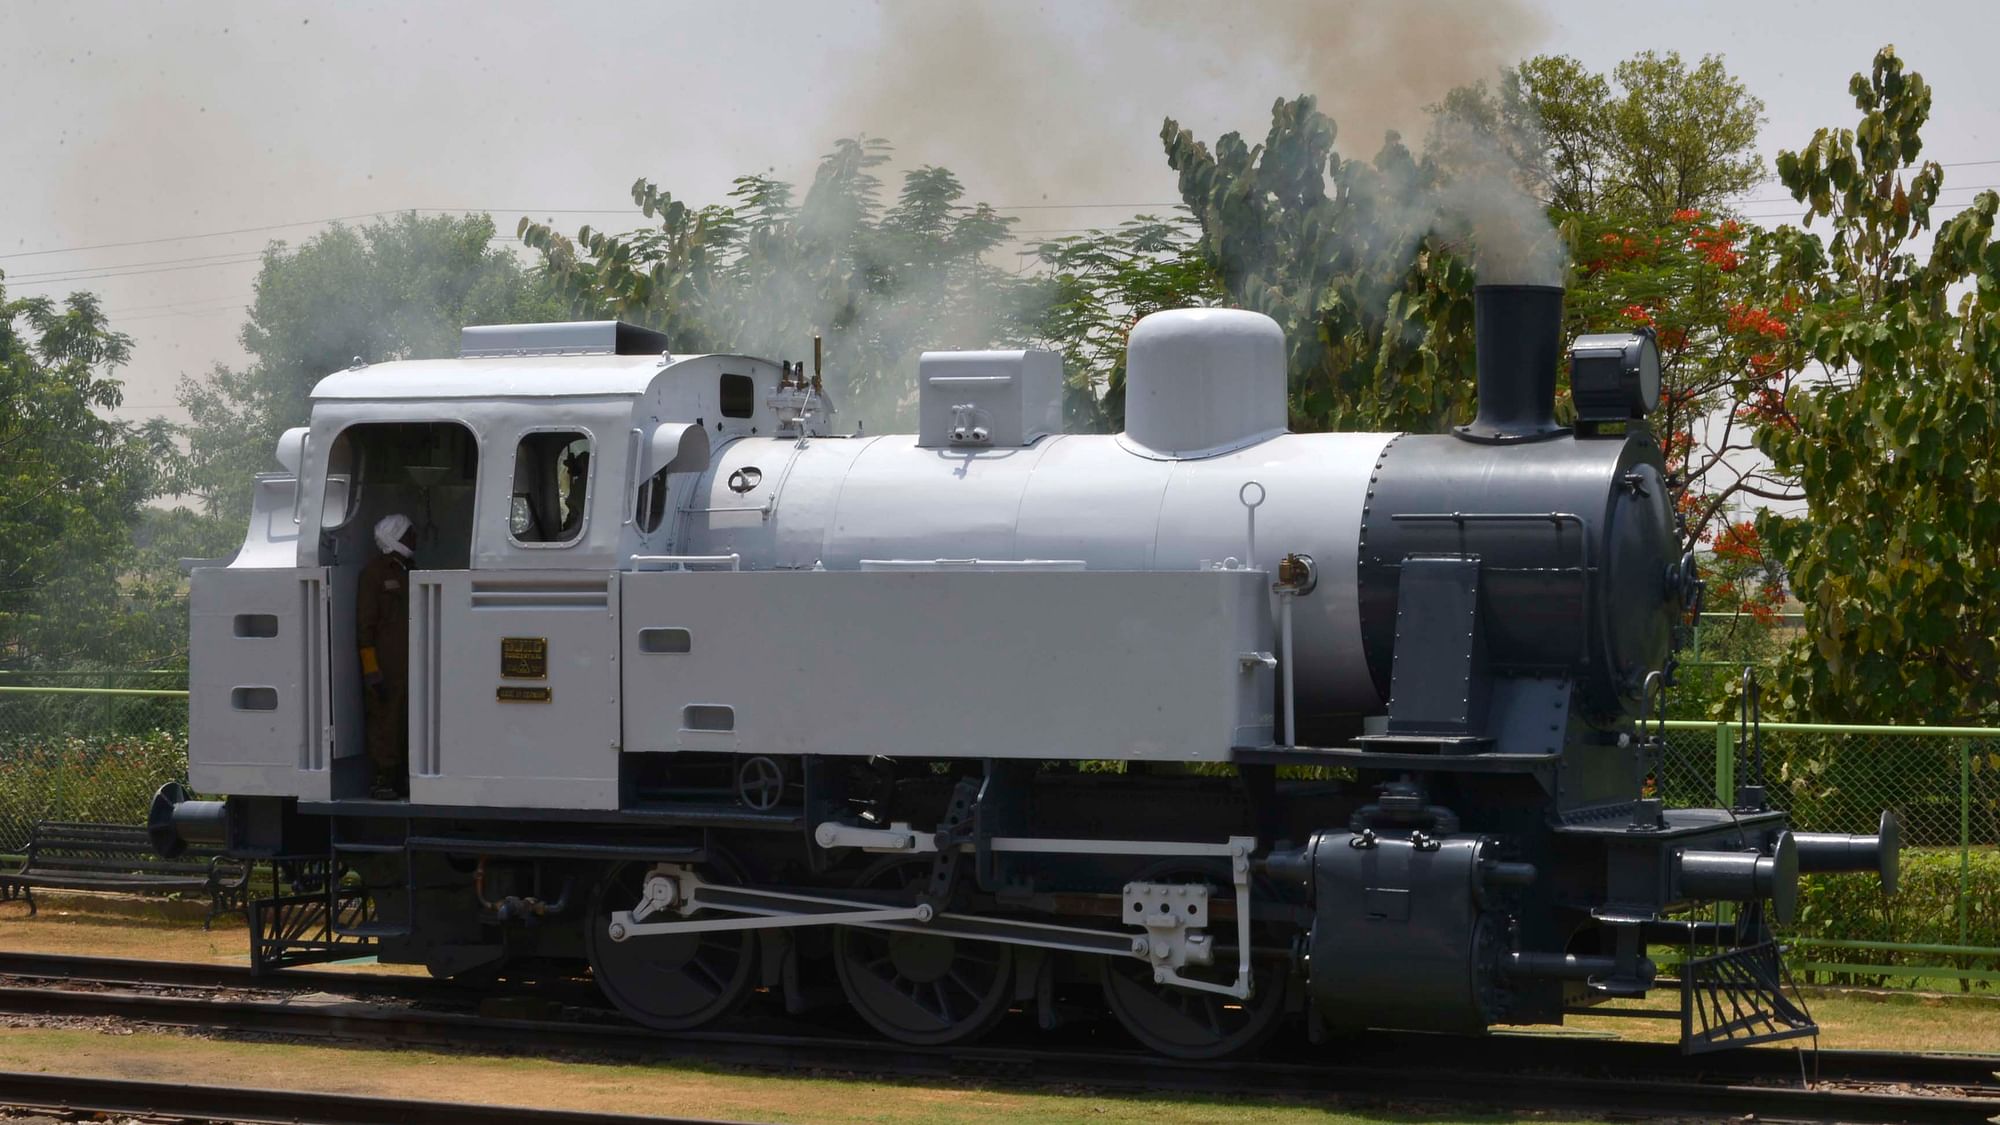 What’s a 1953 Jung Steam Locomotive Doing in a Haryana Town?